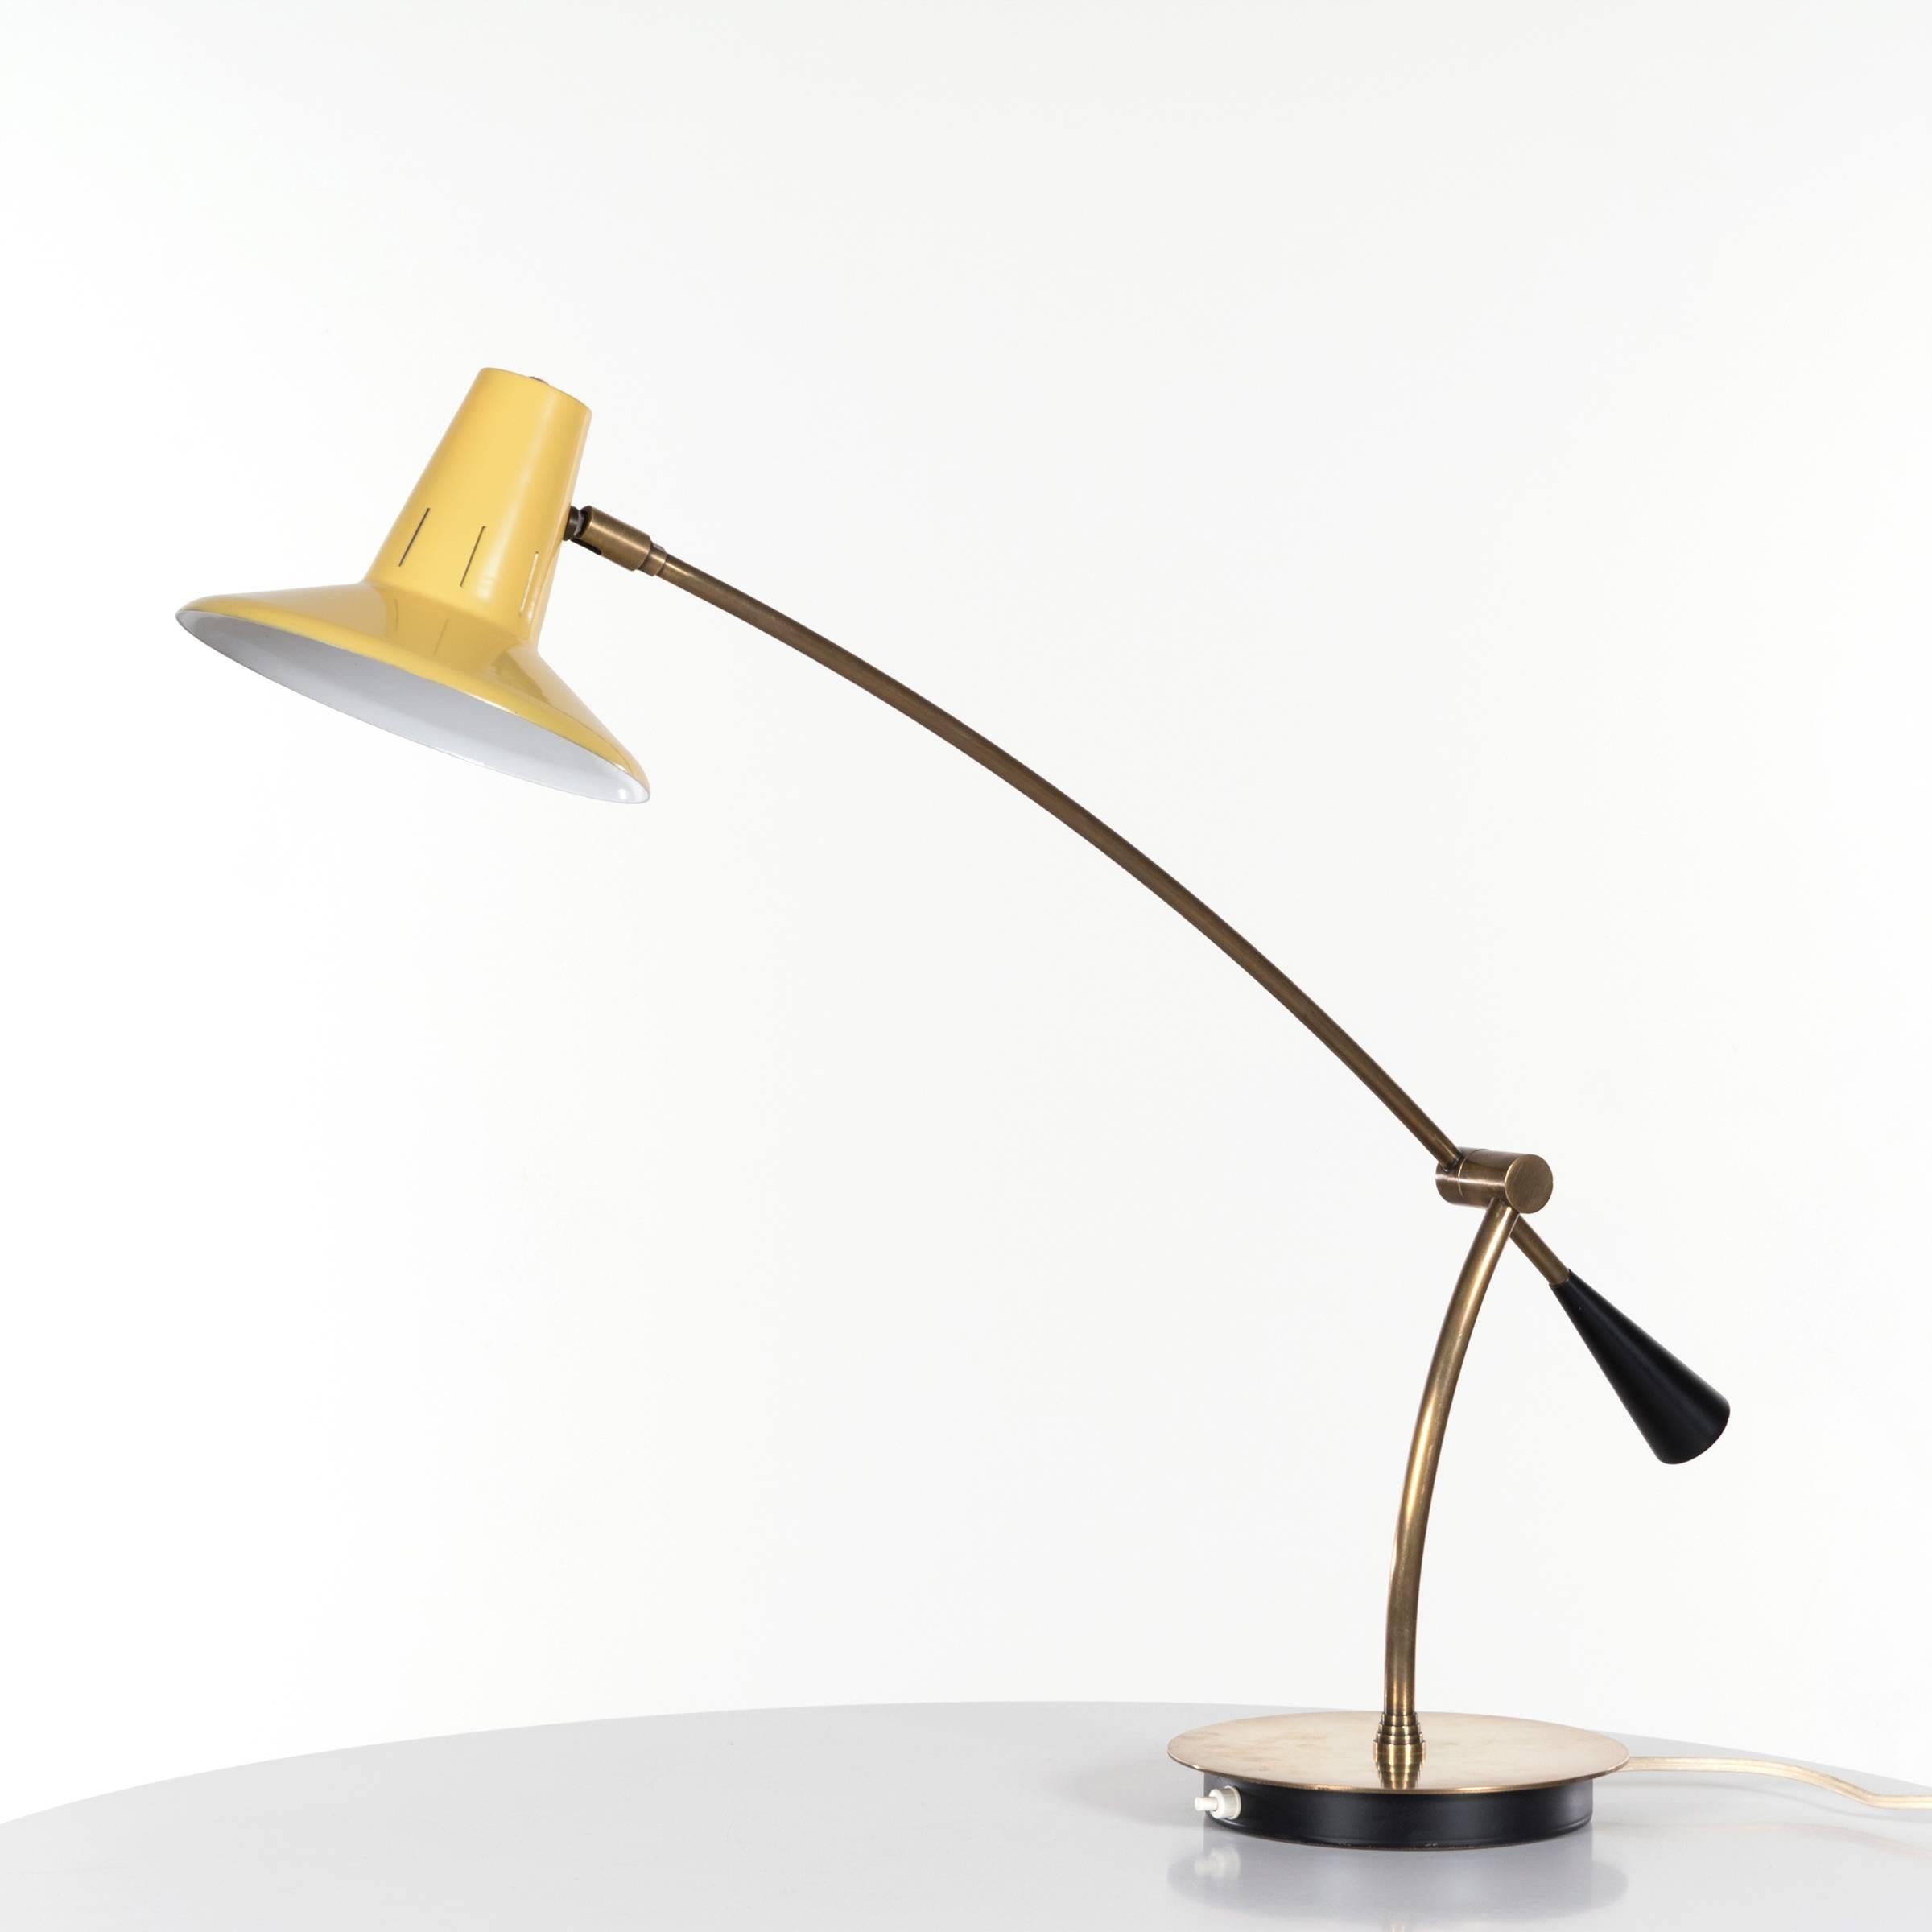 Elegant desk or table lamp by an unknown designer and manufacturer. Brass base with black accents adjustable in height and angle. Yellow enameled steel lamp cover. All in very good original condition.